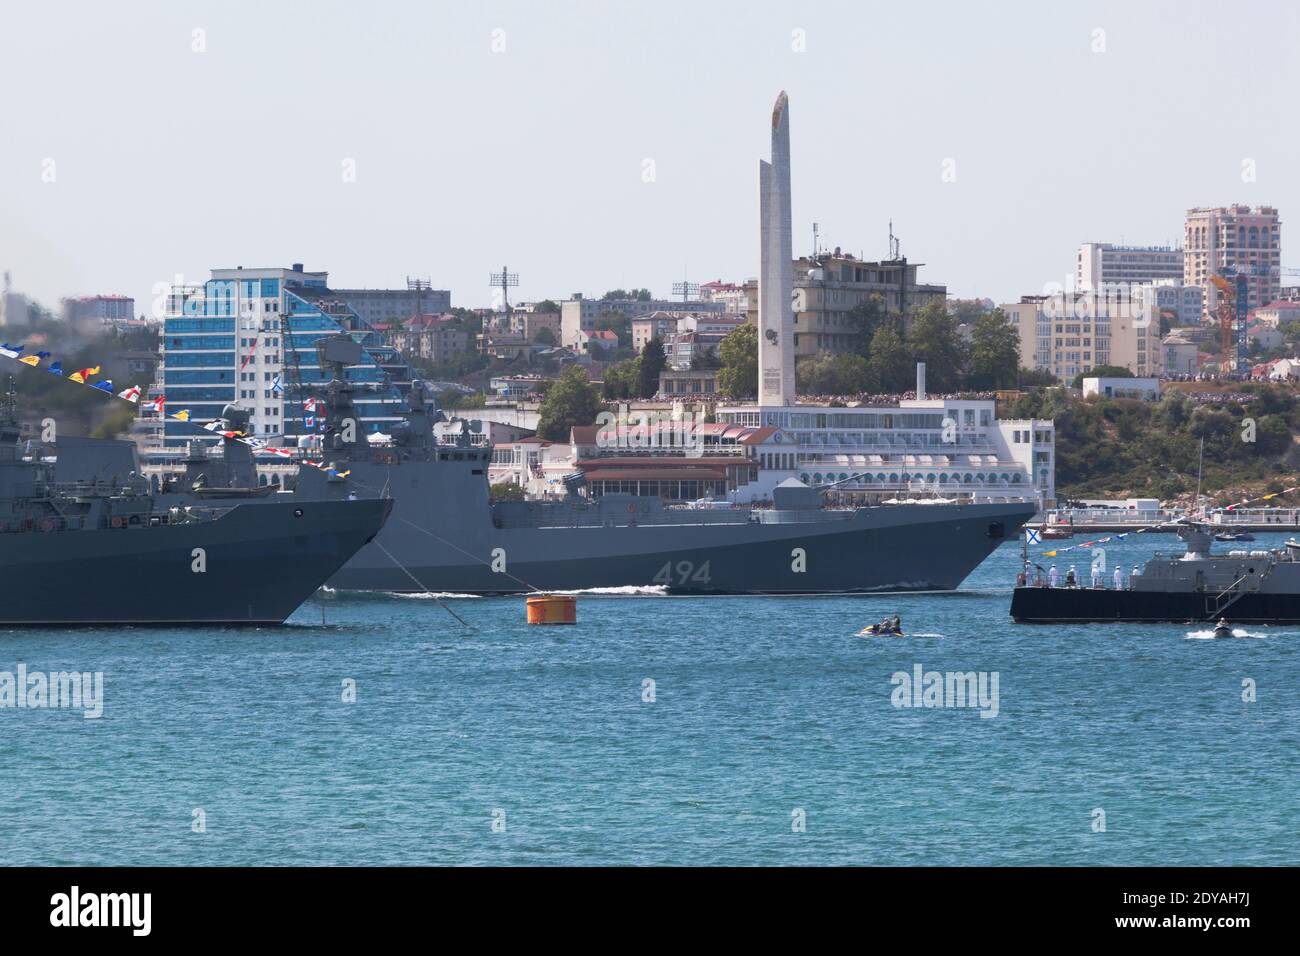 Sevastopol, Crimea, Russia - July 26, 2020: Frigate Admiral Grigorovich at the parade in honor of the Day of the Navy against the background of the he Stock Photo